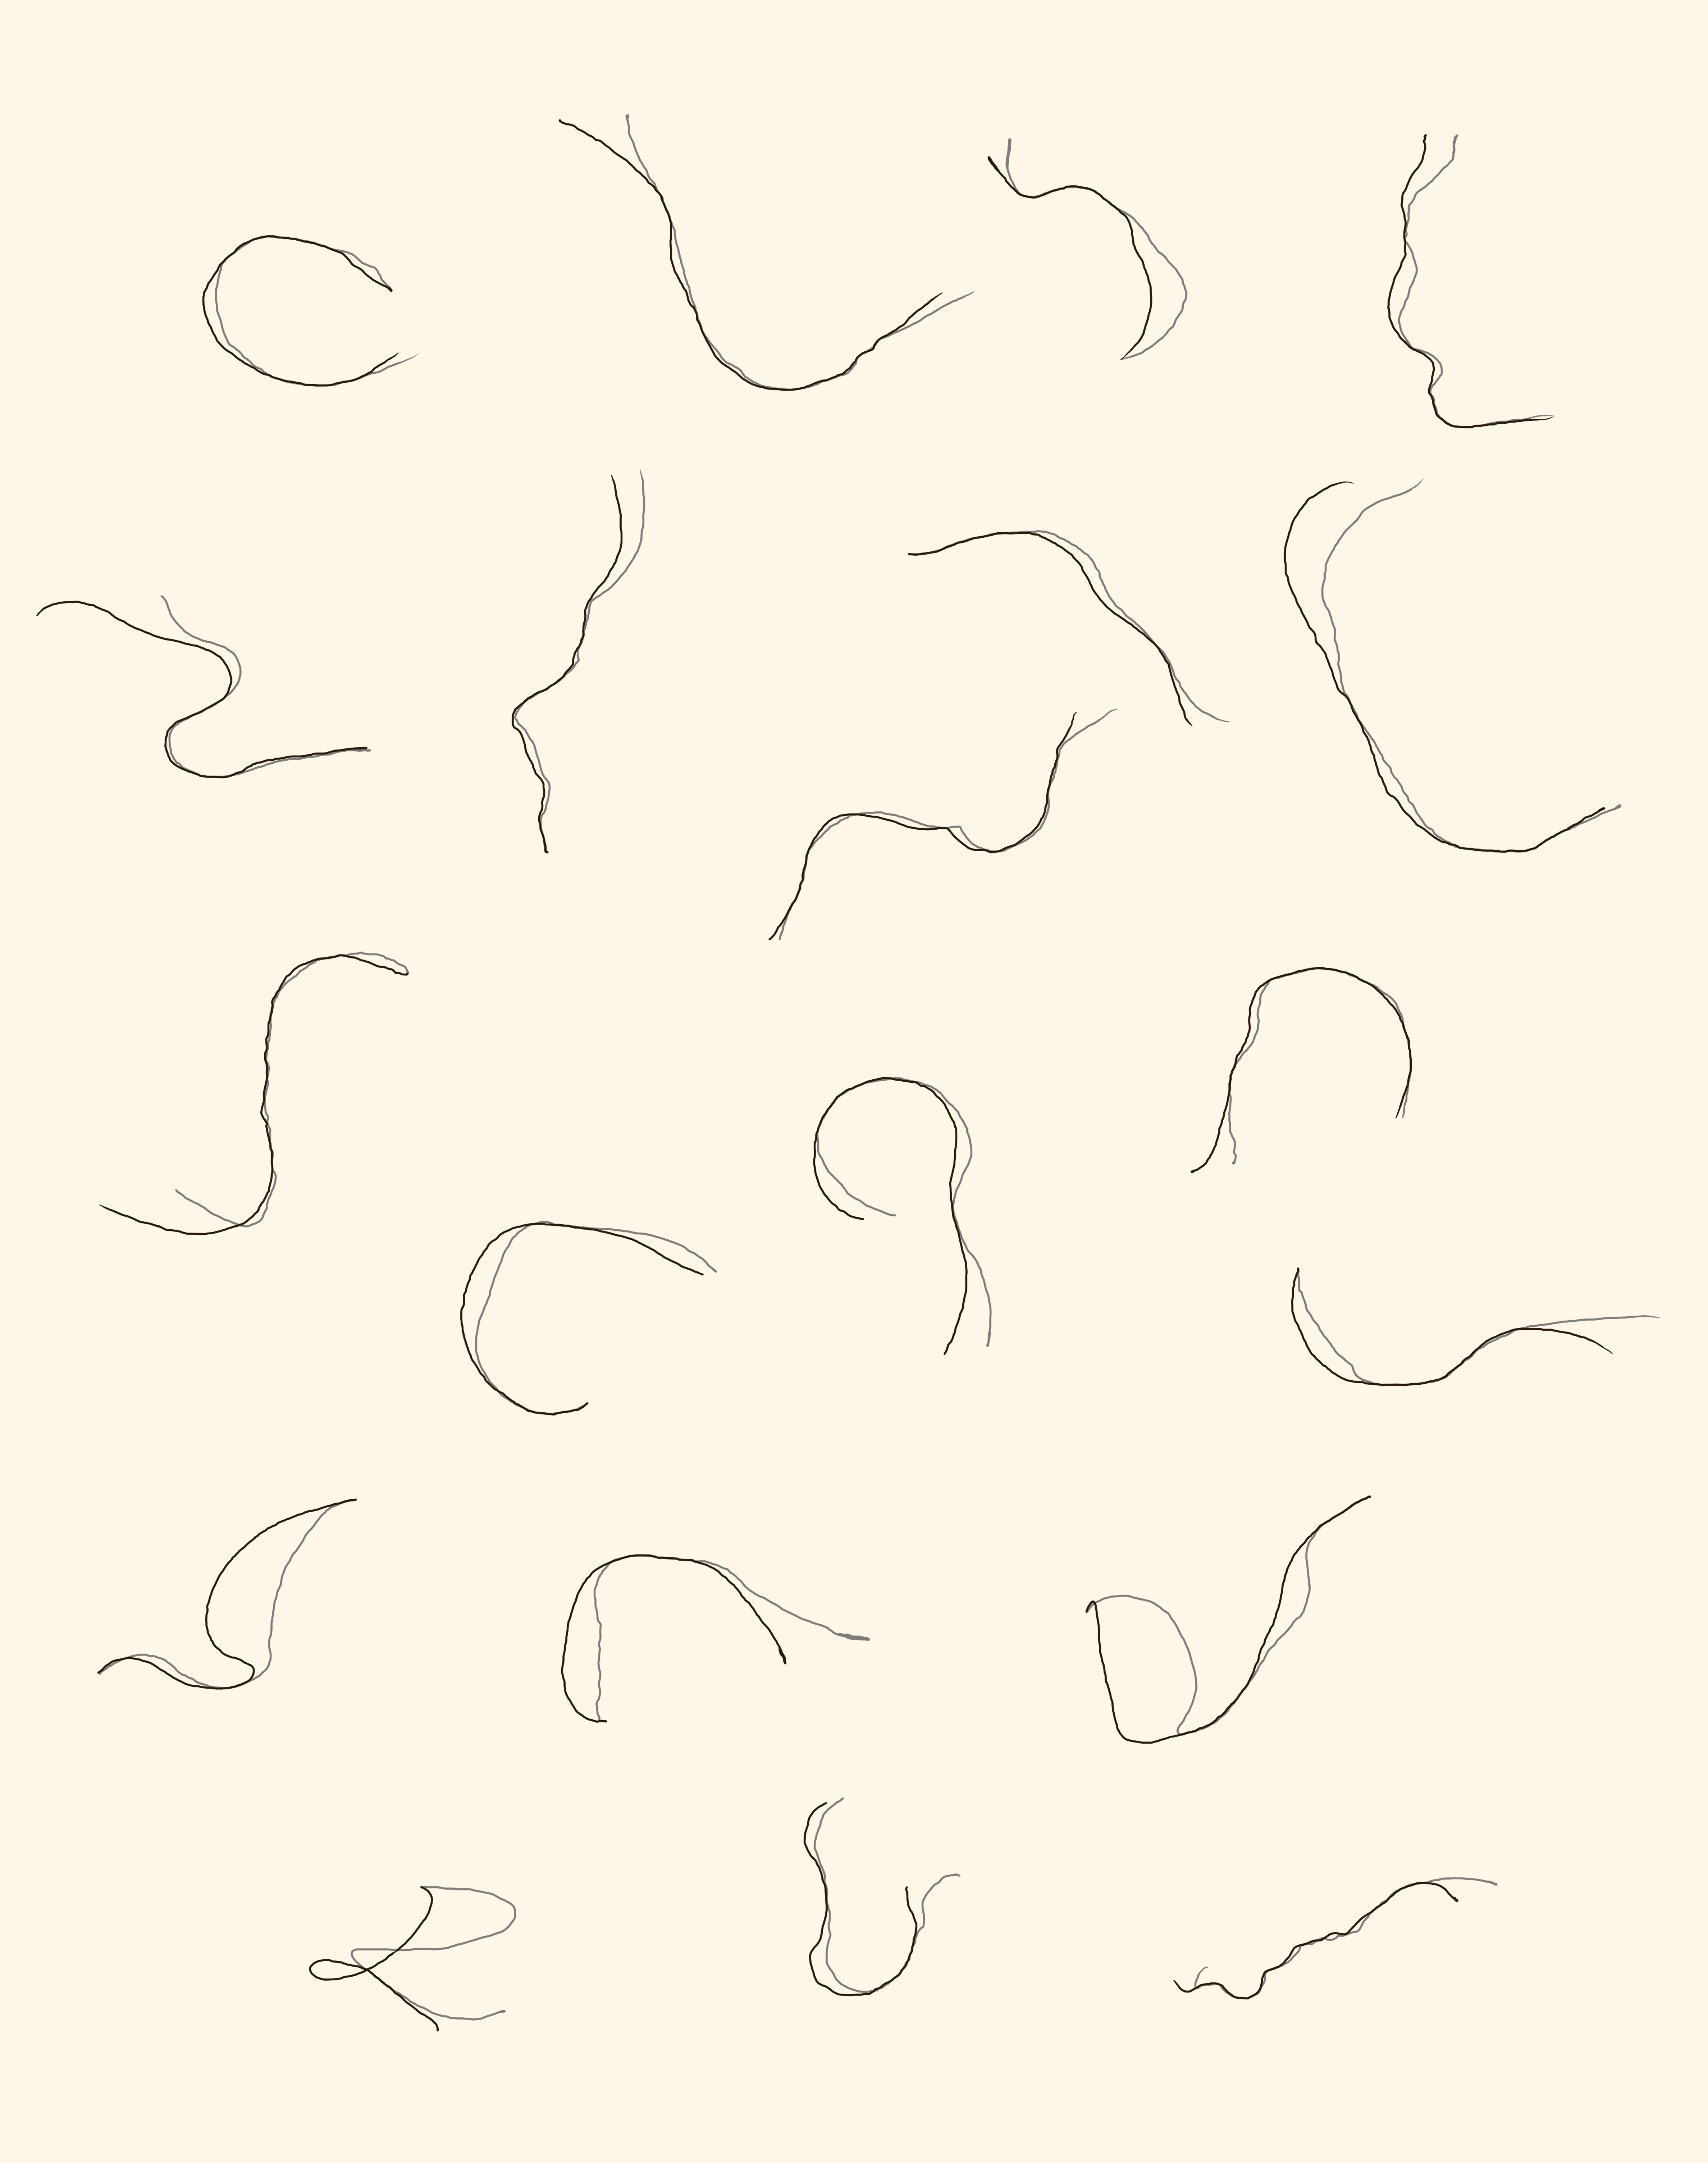 digital drawing of hairs with shadows